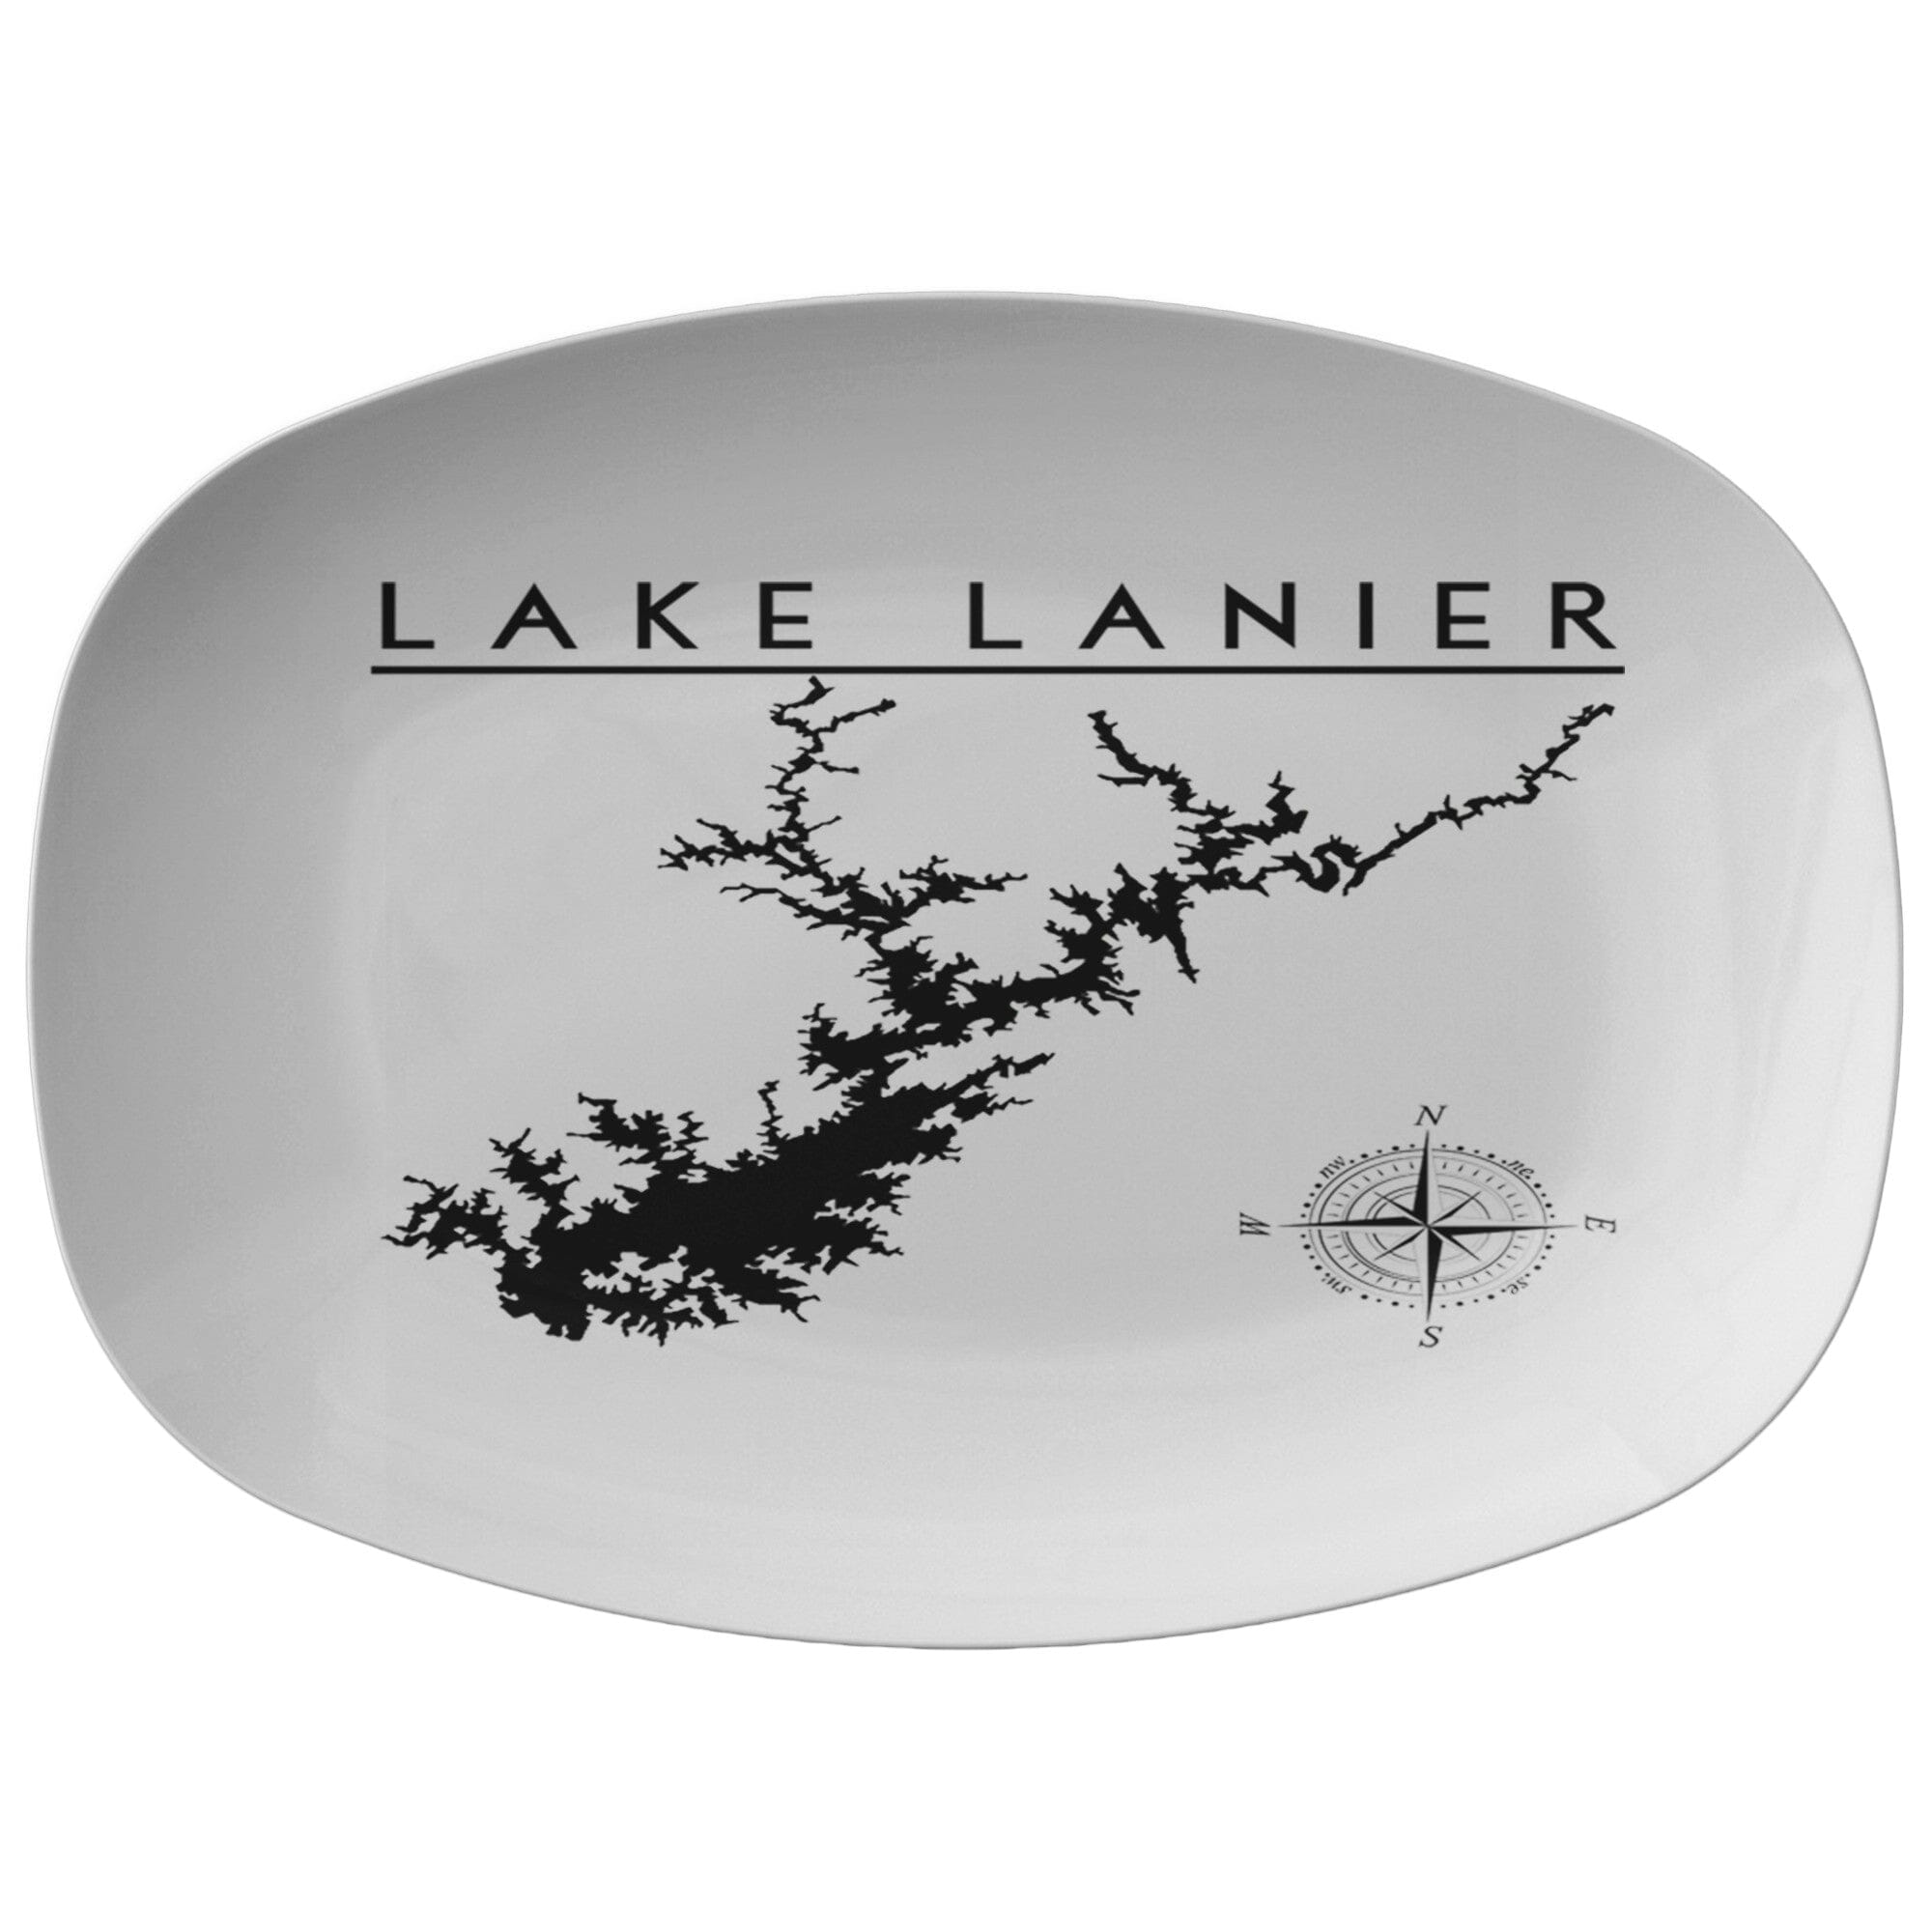 Lake Lanier Map Serving Platter, Unbreakable Outdoor Dinnerware, Printed, Lake Gift, Valentines Day Gift For Boaters, Chef Gift, Polymer Kitchenware 